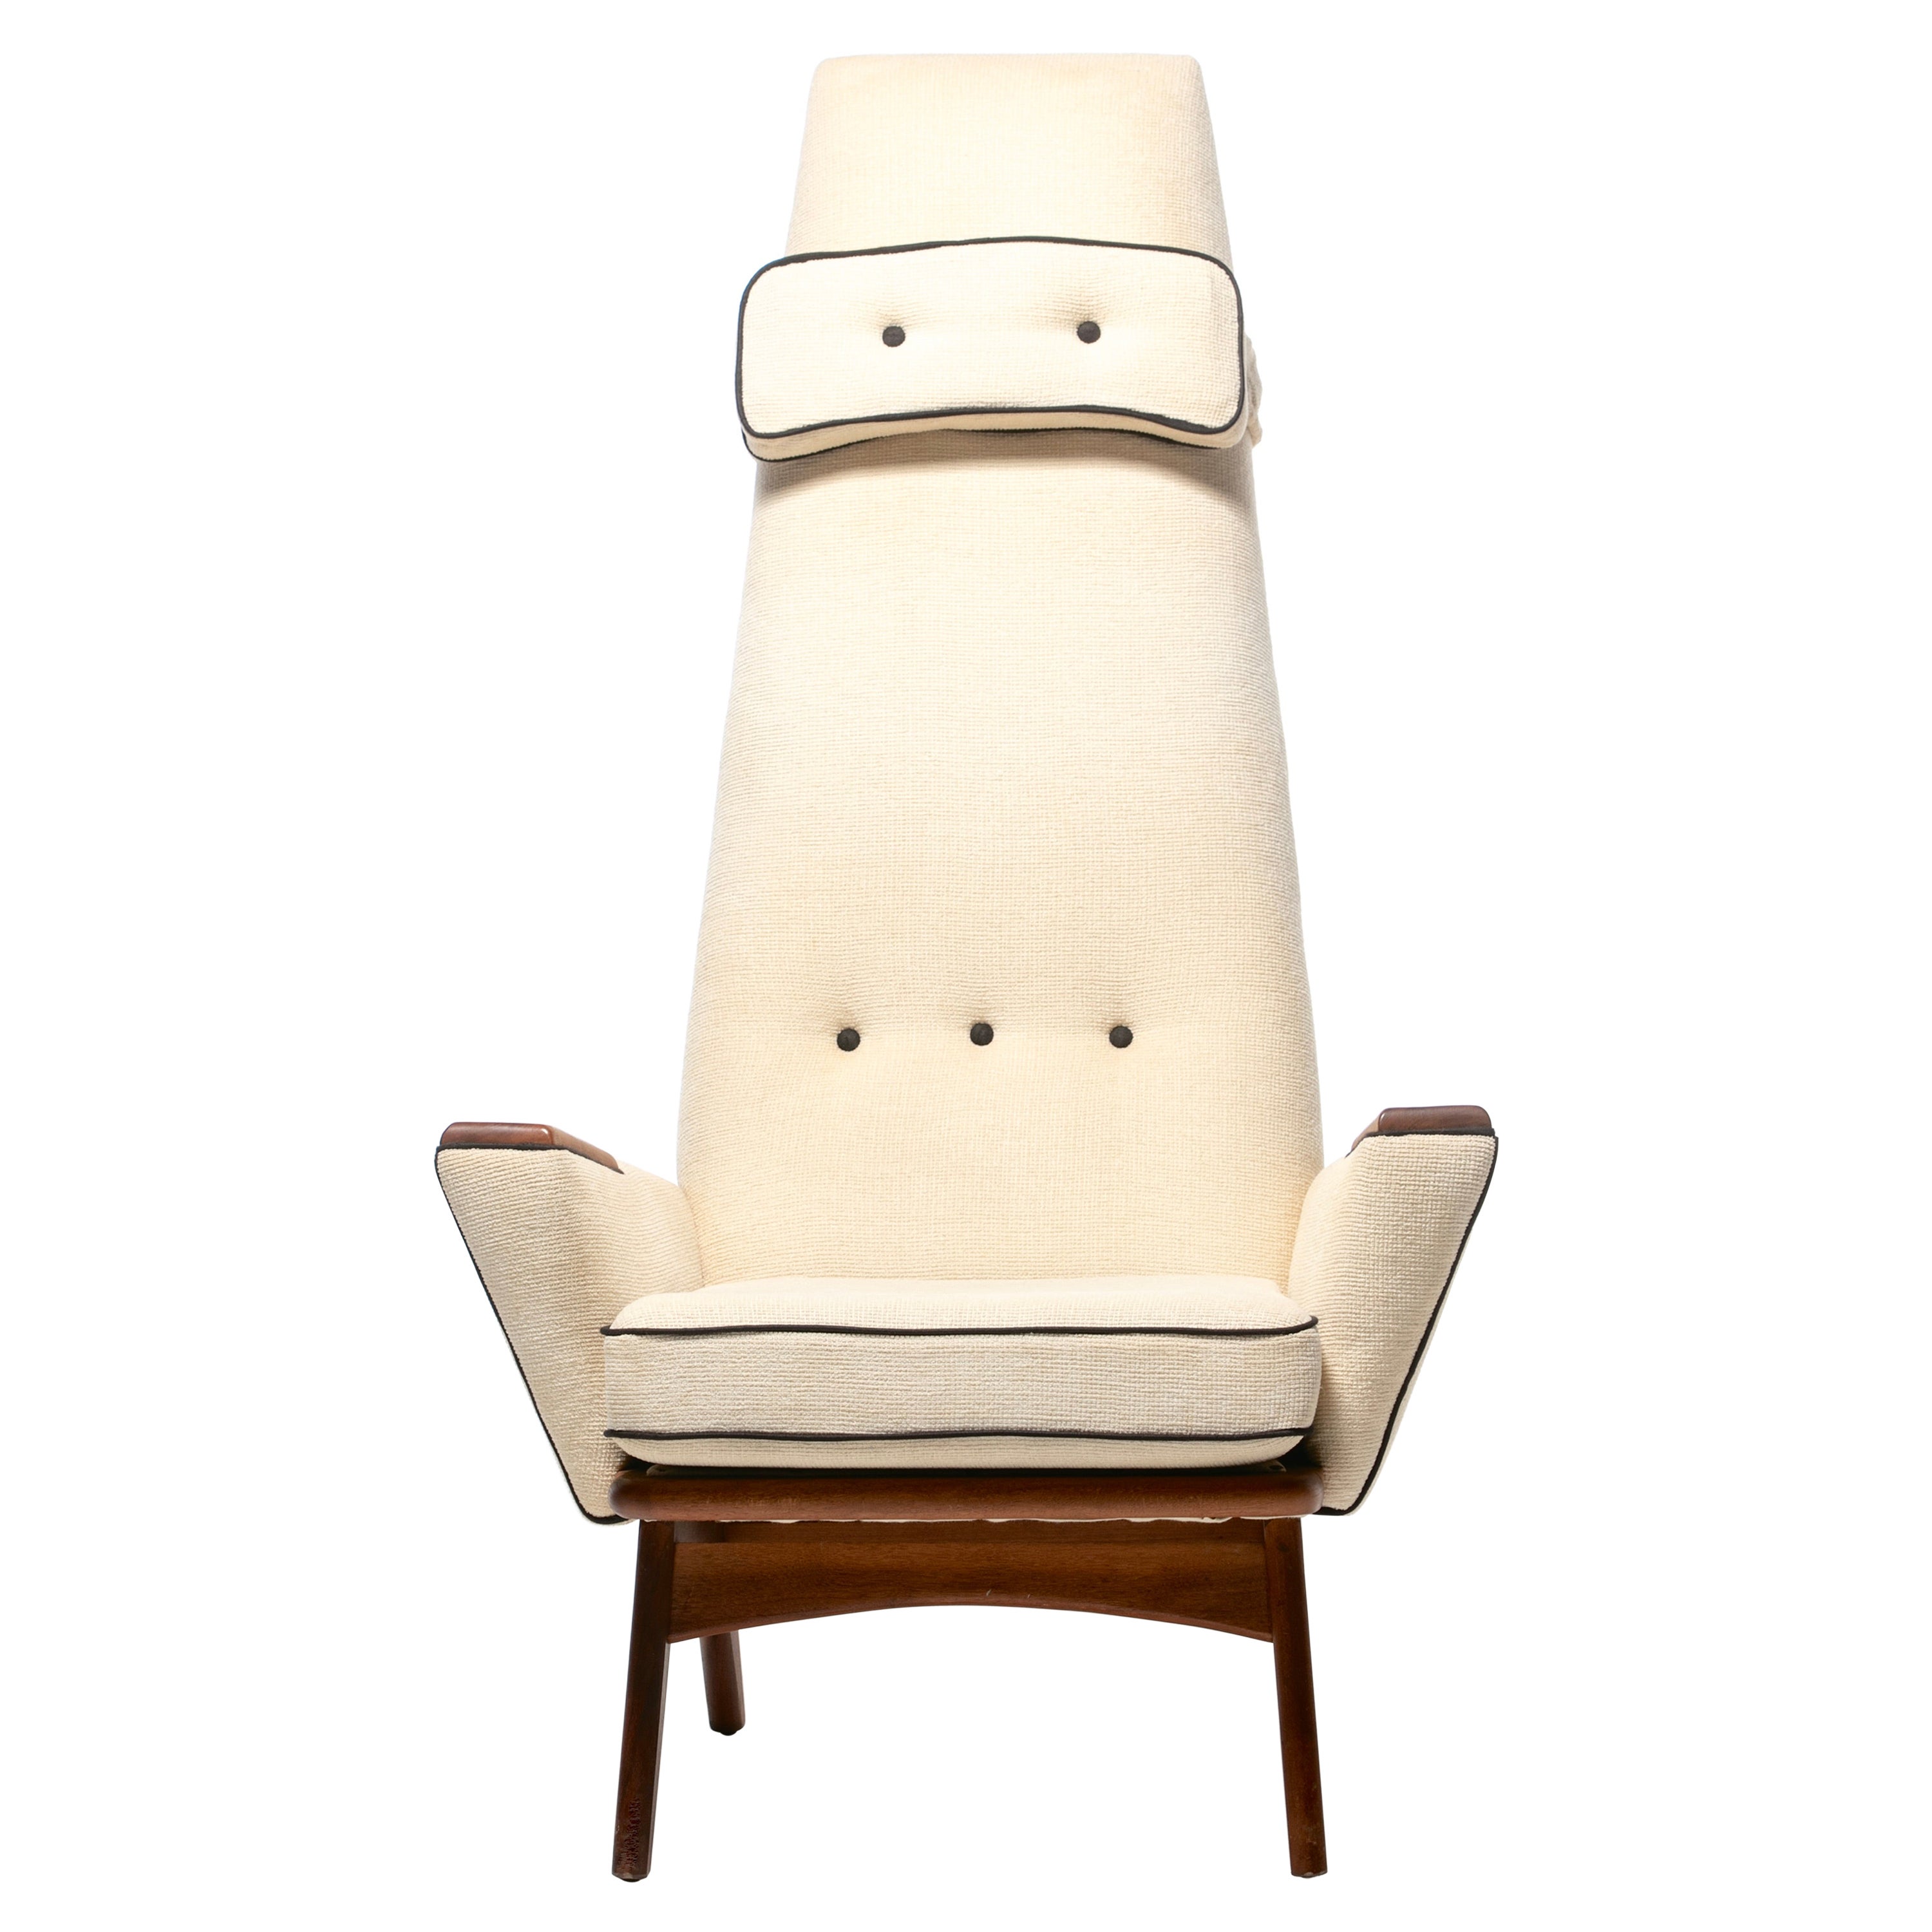 Adrian Pearsall Ivory White High Back Arm Chair with Black Piping Model 1865-C